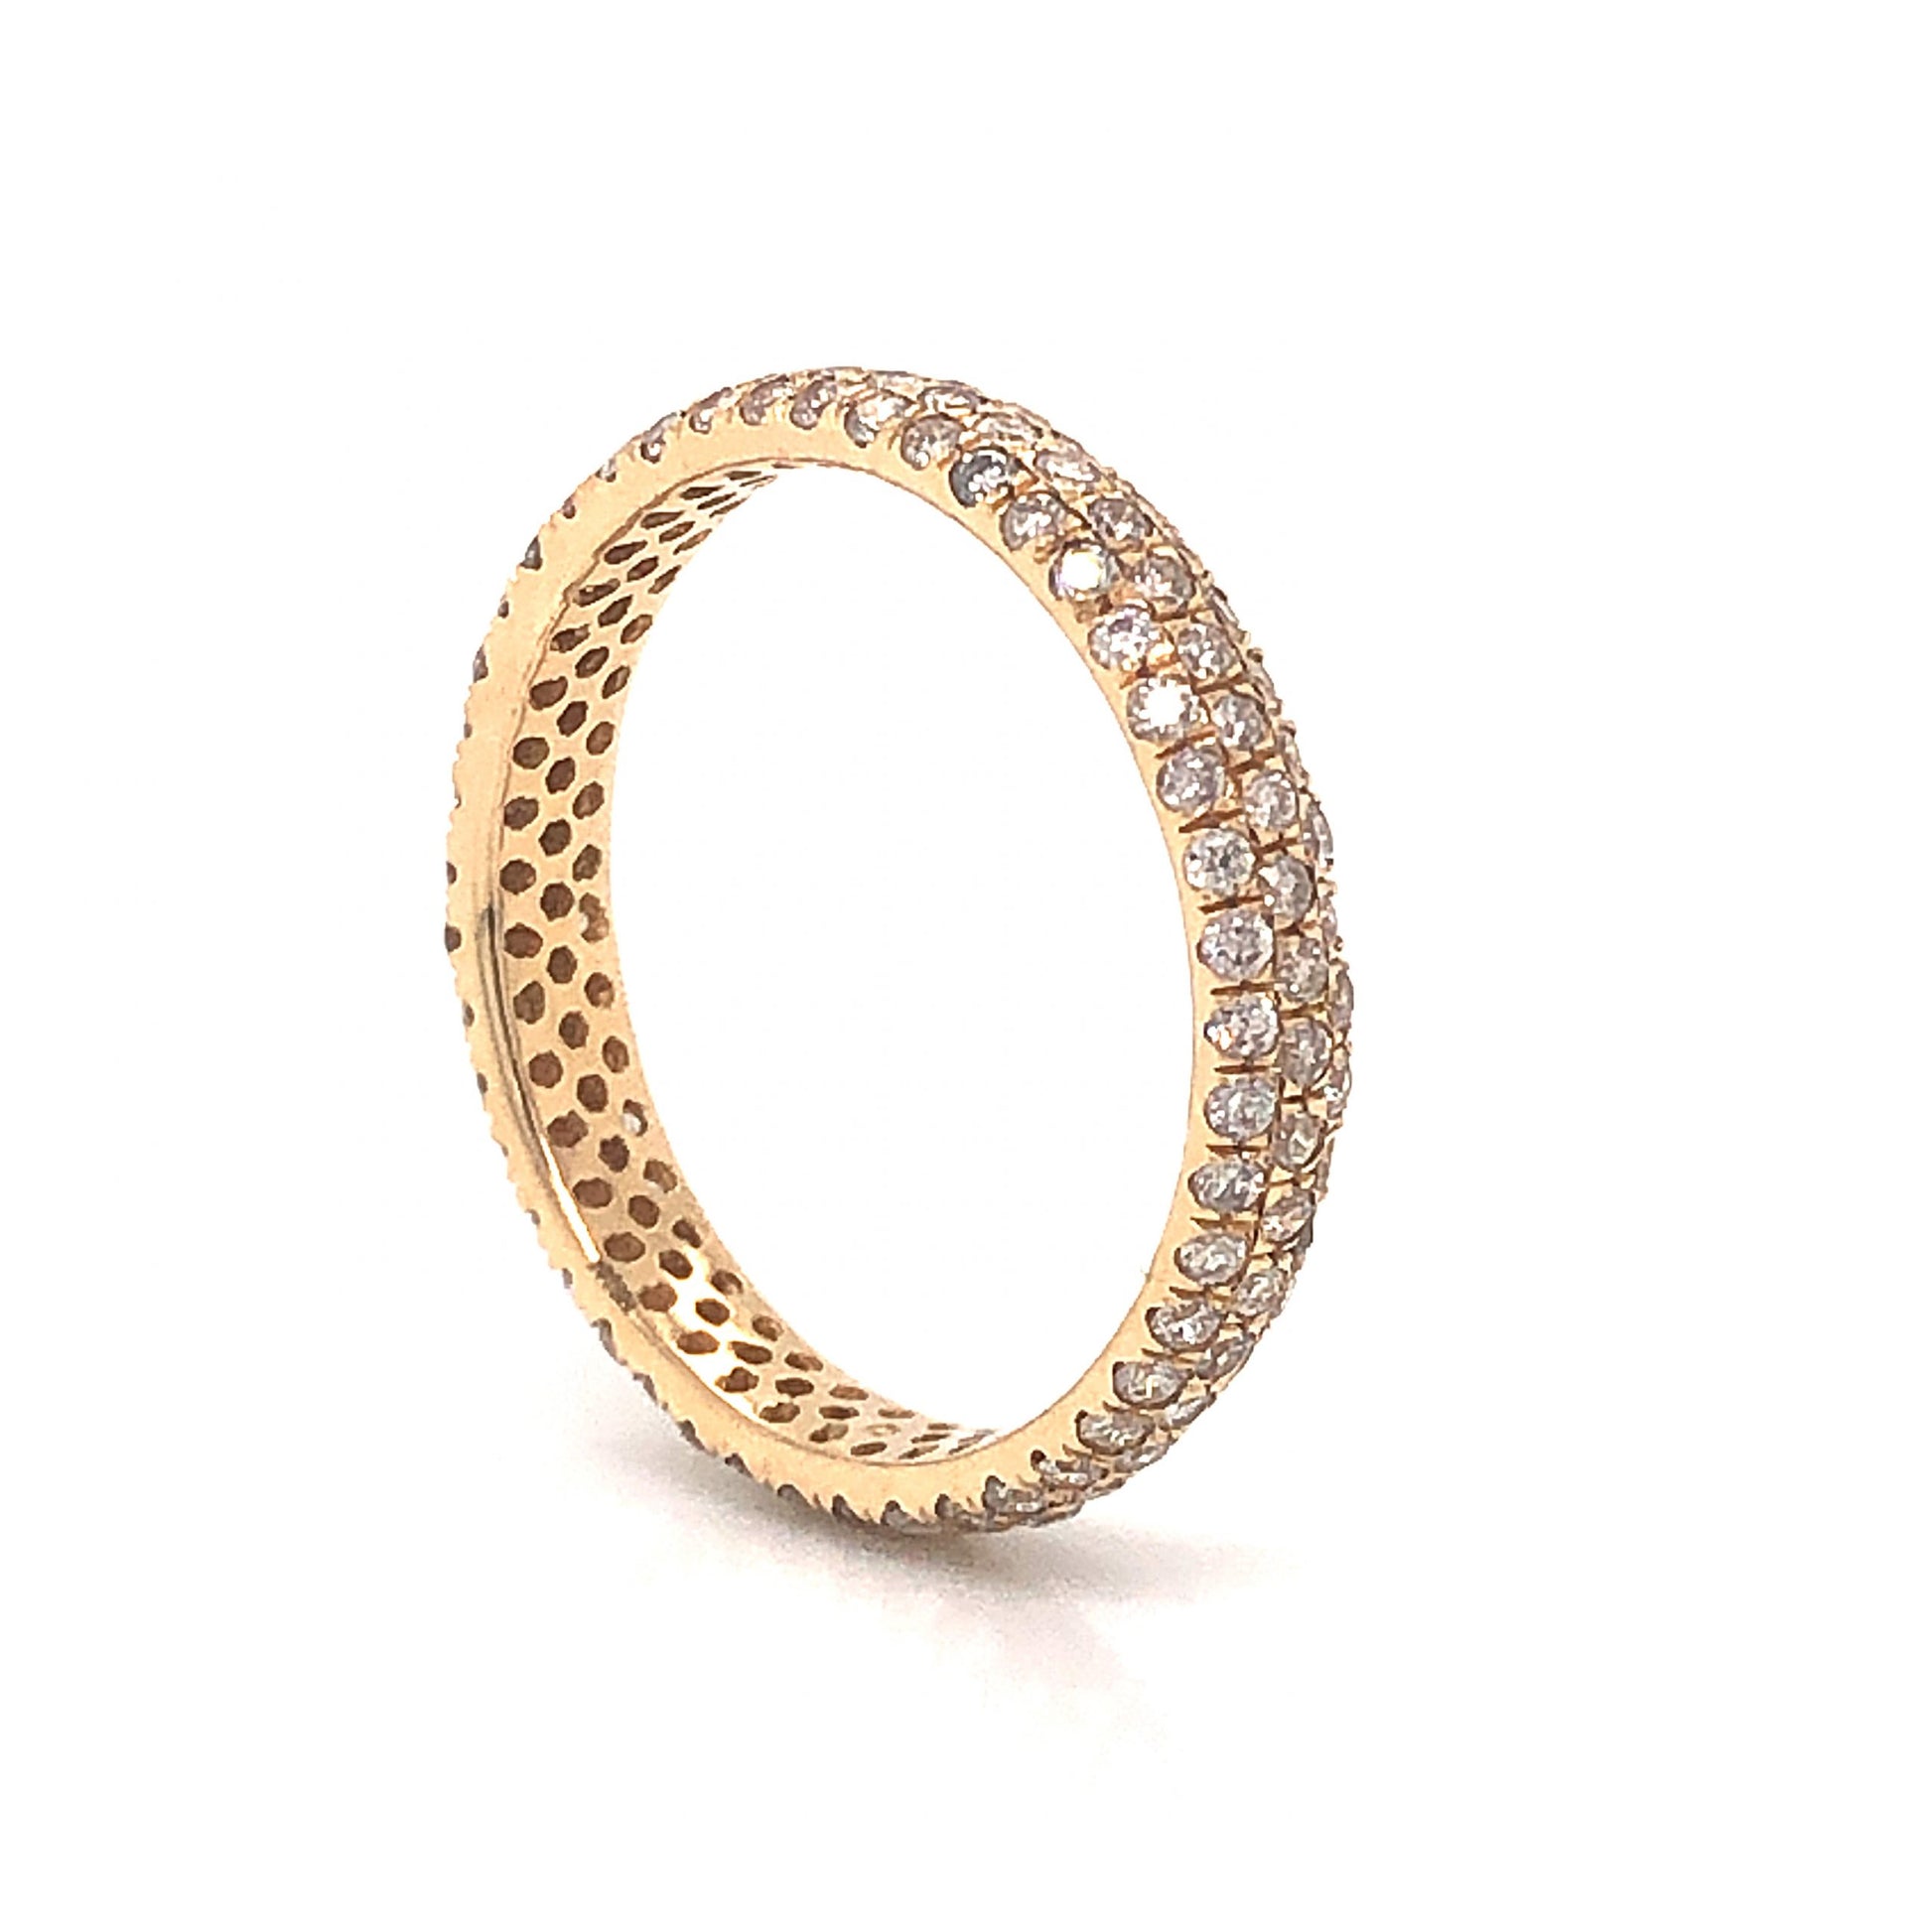 Pave Diamond Eternity Band in 14k Yellow GoldComposition: 14 Karat Yellow GoldRing Size: 7Total Diamond Weight: .88 ctTotal Gram Weight: 1.9 g